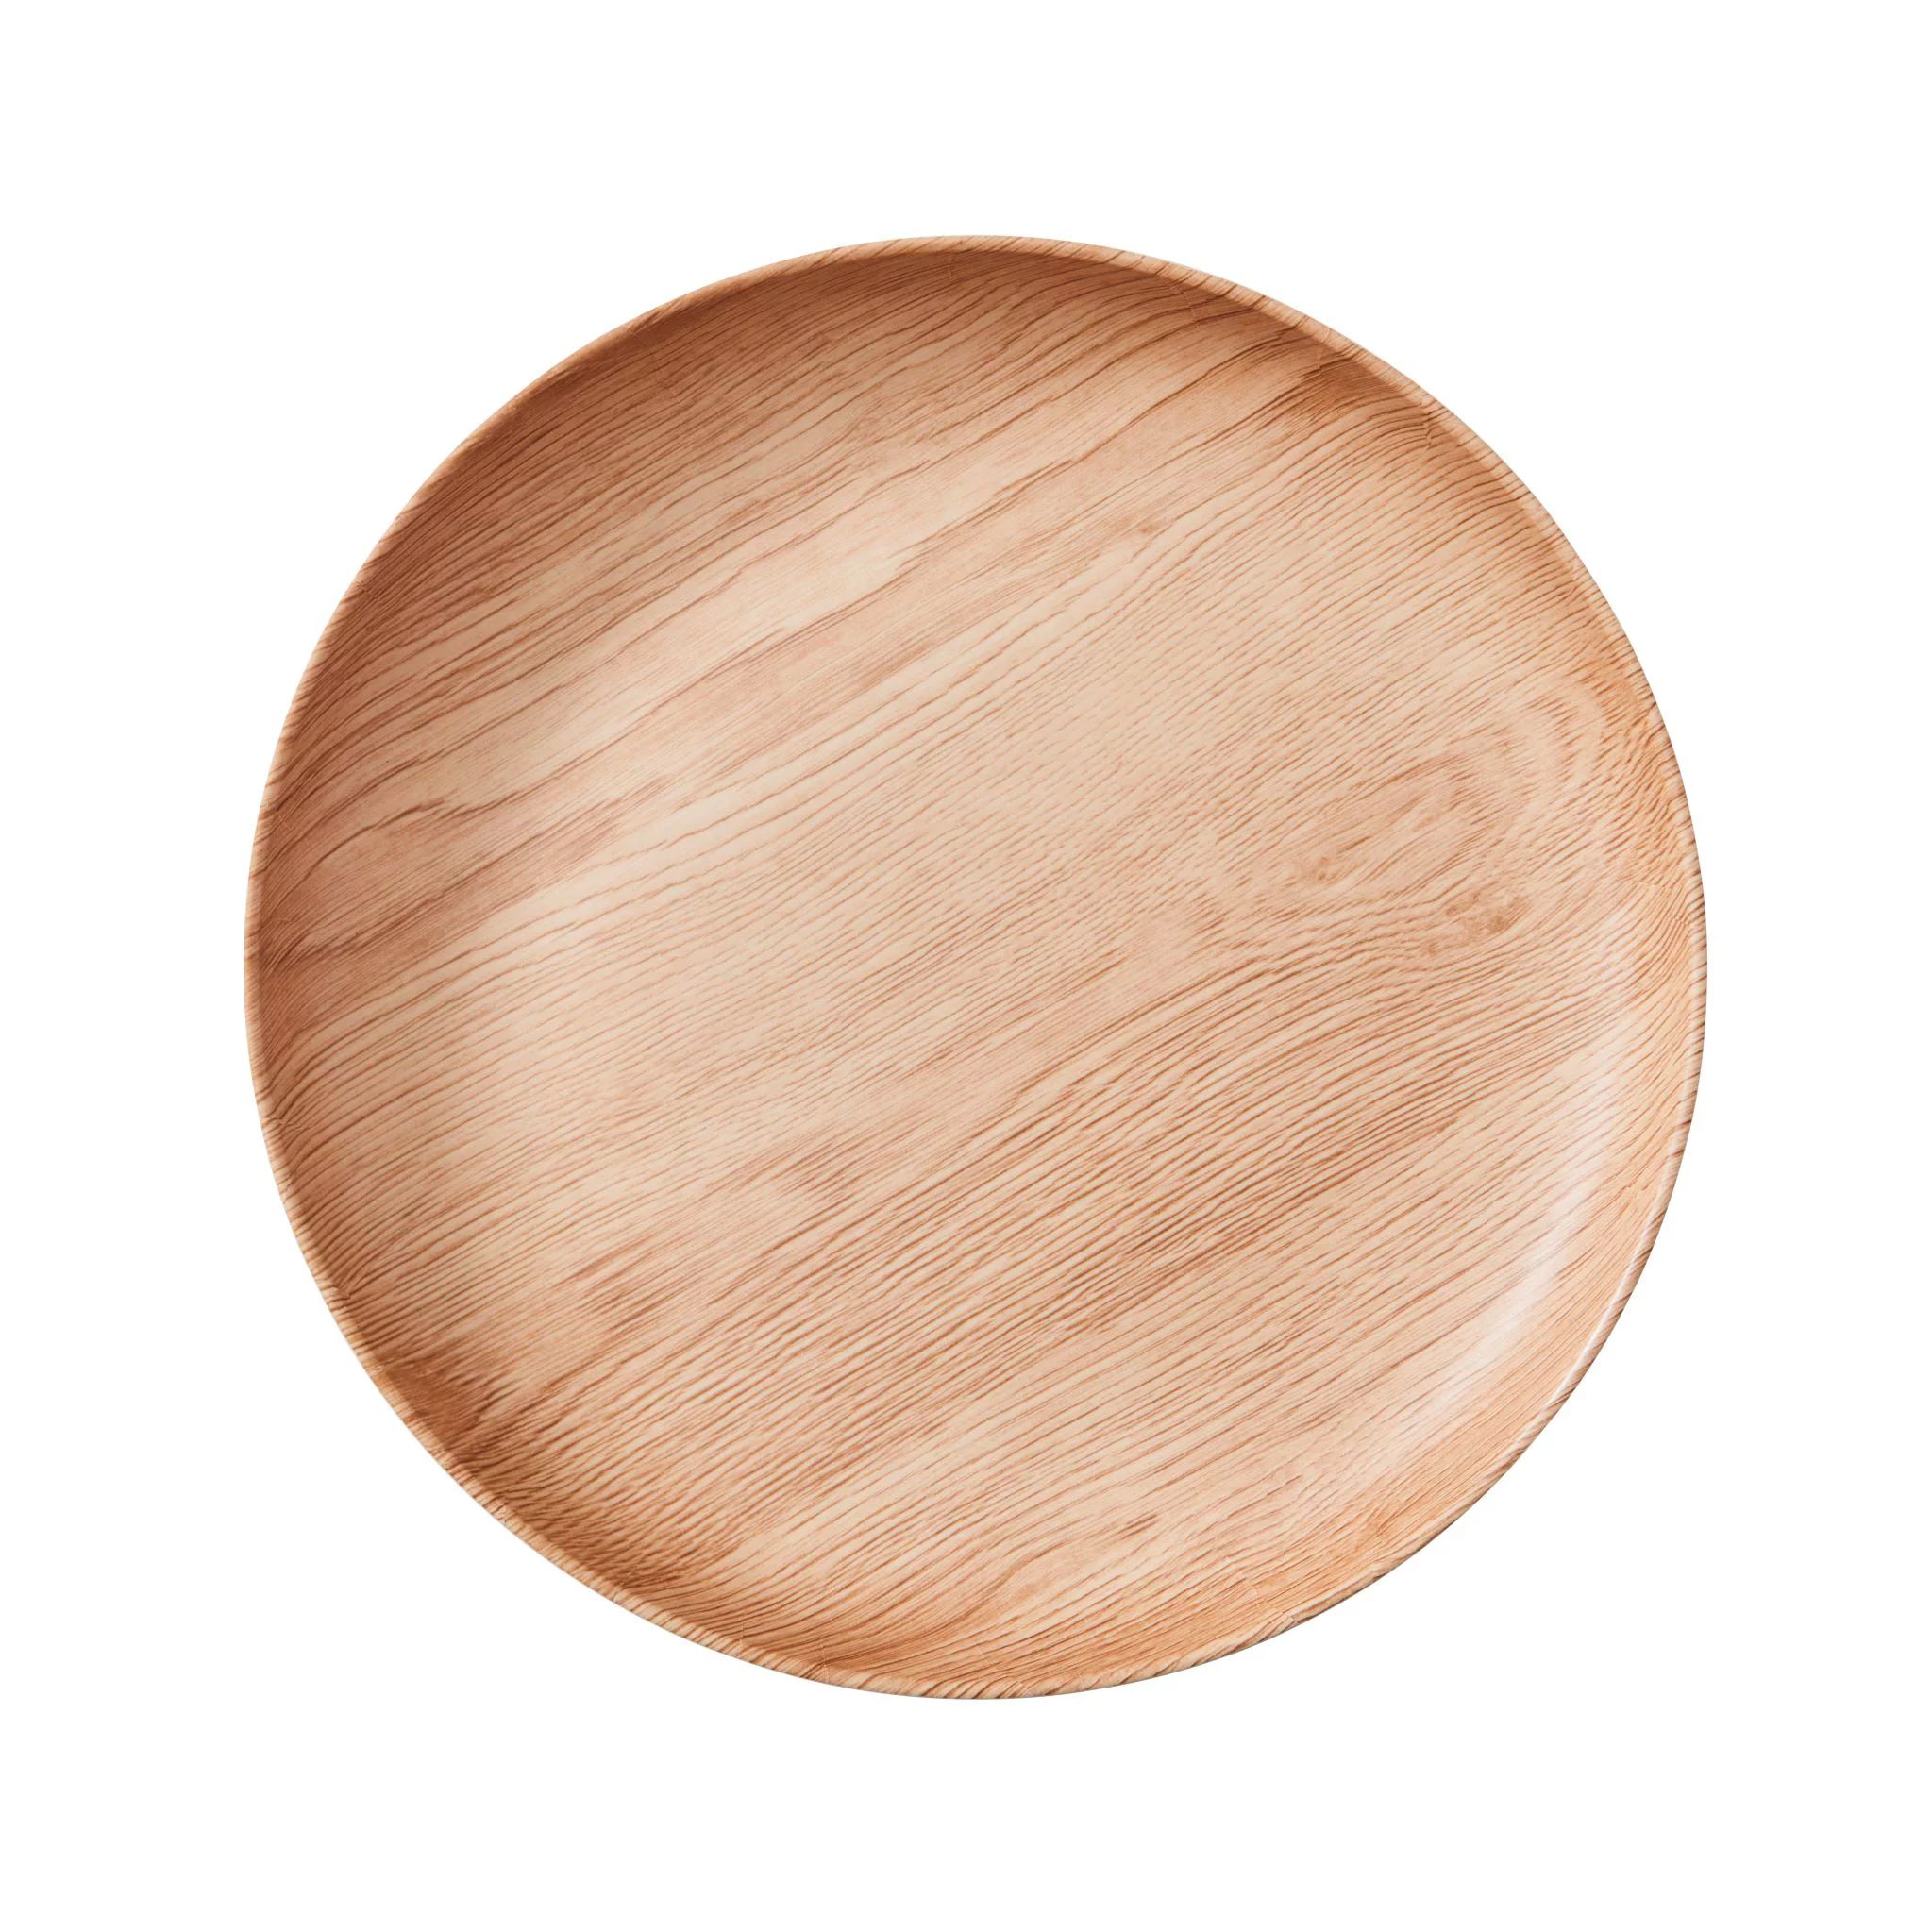 Better Homes & Gardens Eco-Friendly Bamboo Melamine Round Dinner Plate, Faux Brown Wood | Walmart (US)